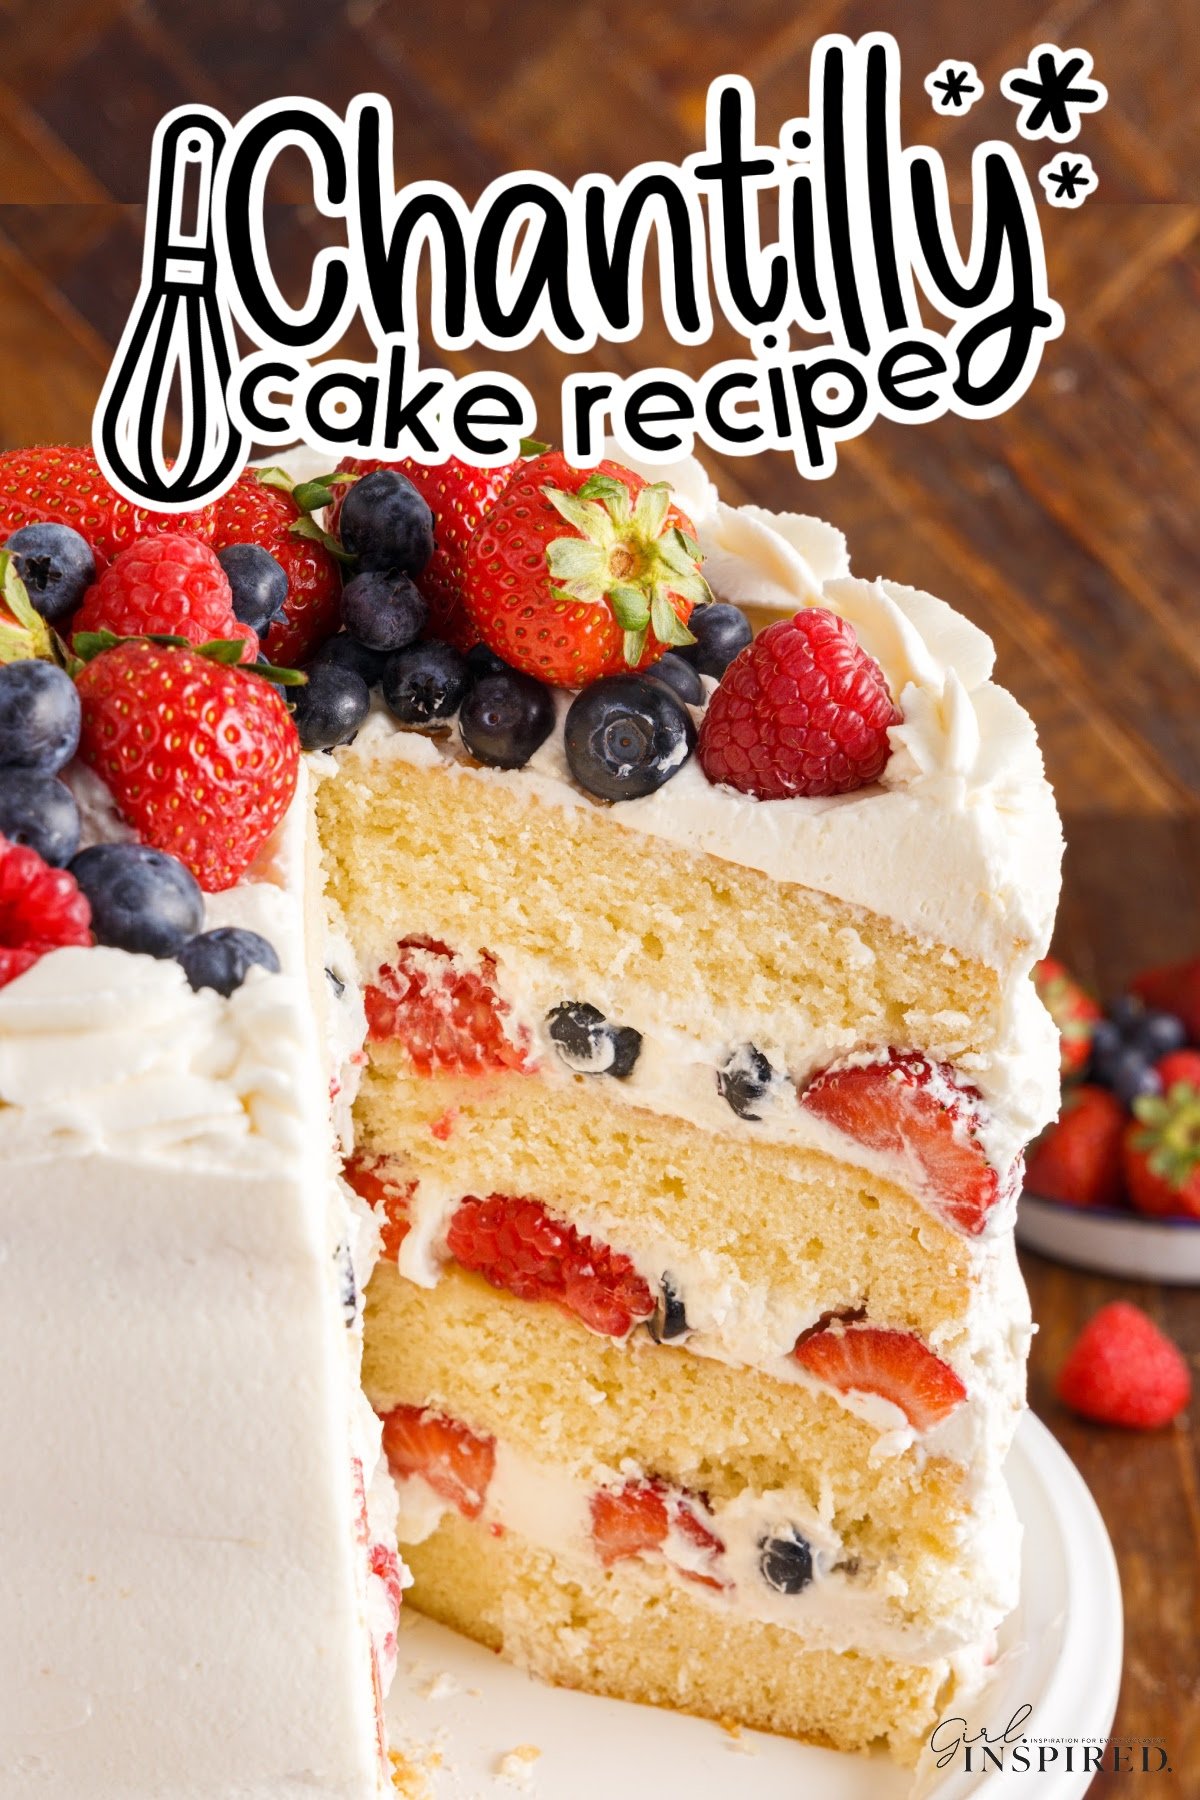 Layered Chantilly Cake with frosting and berries in between the layers and a slice taken out with title overlay.